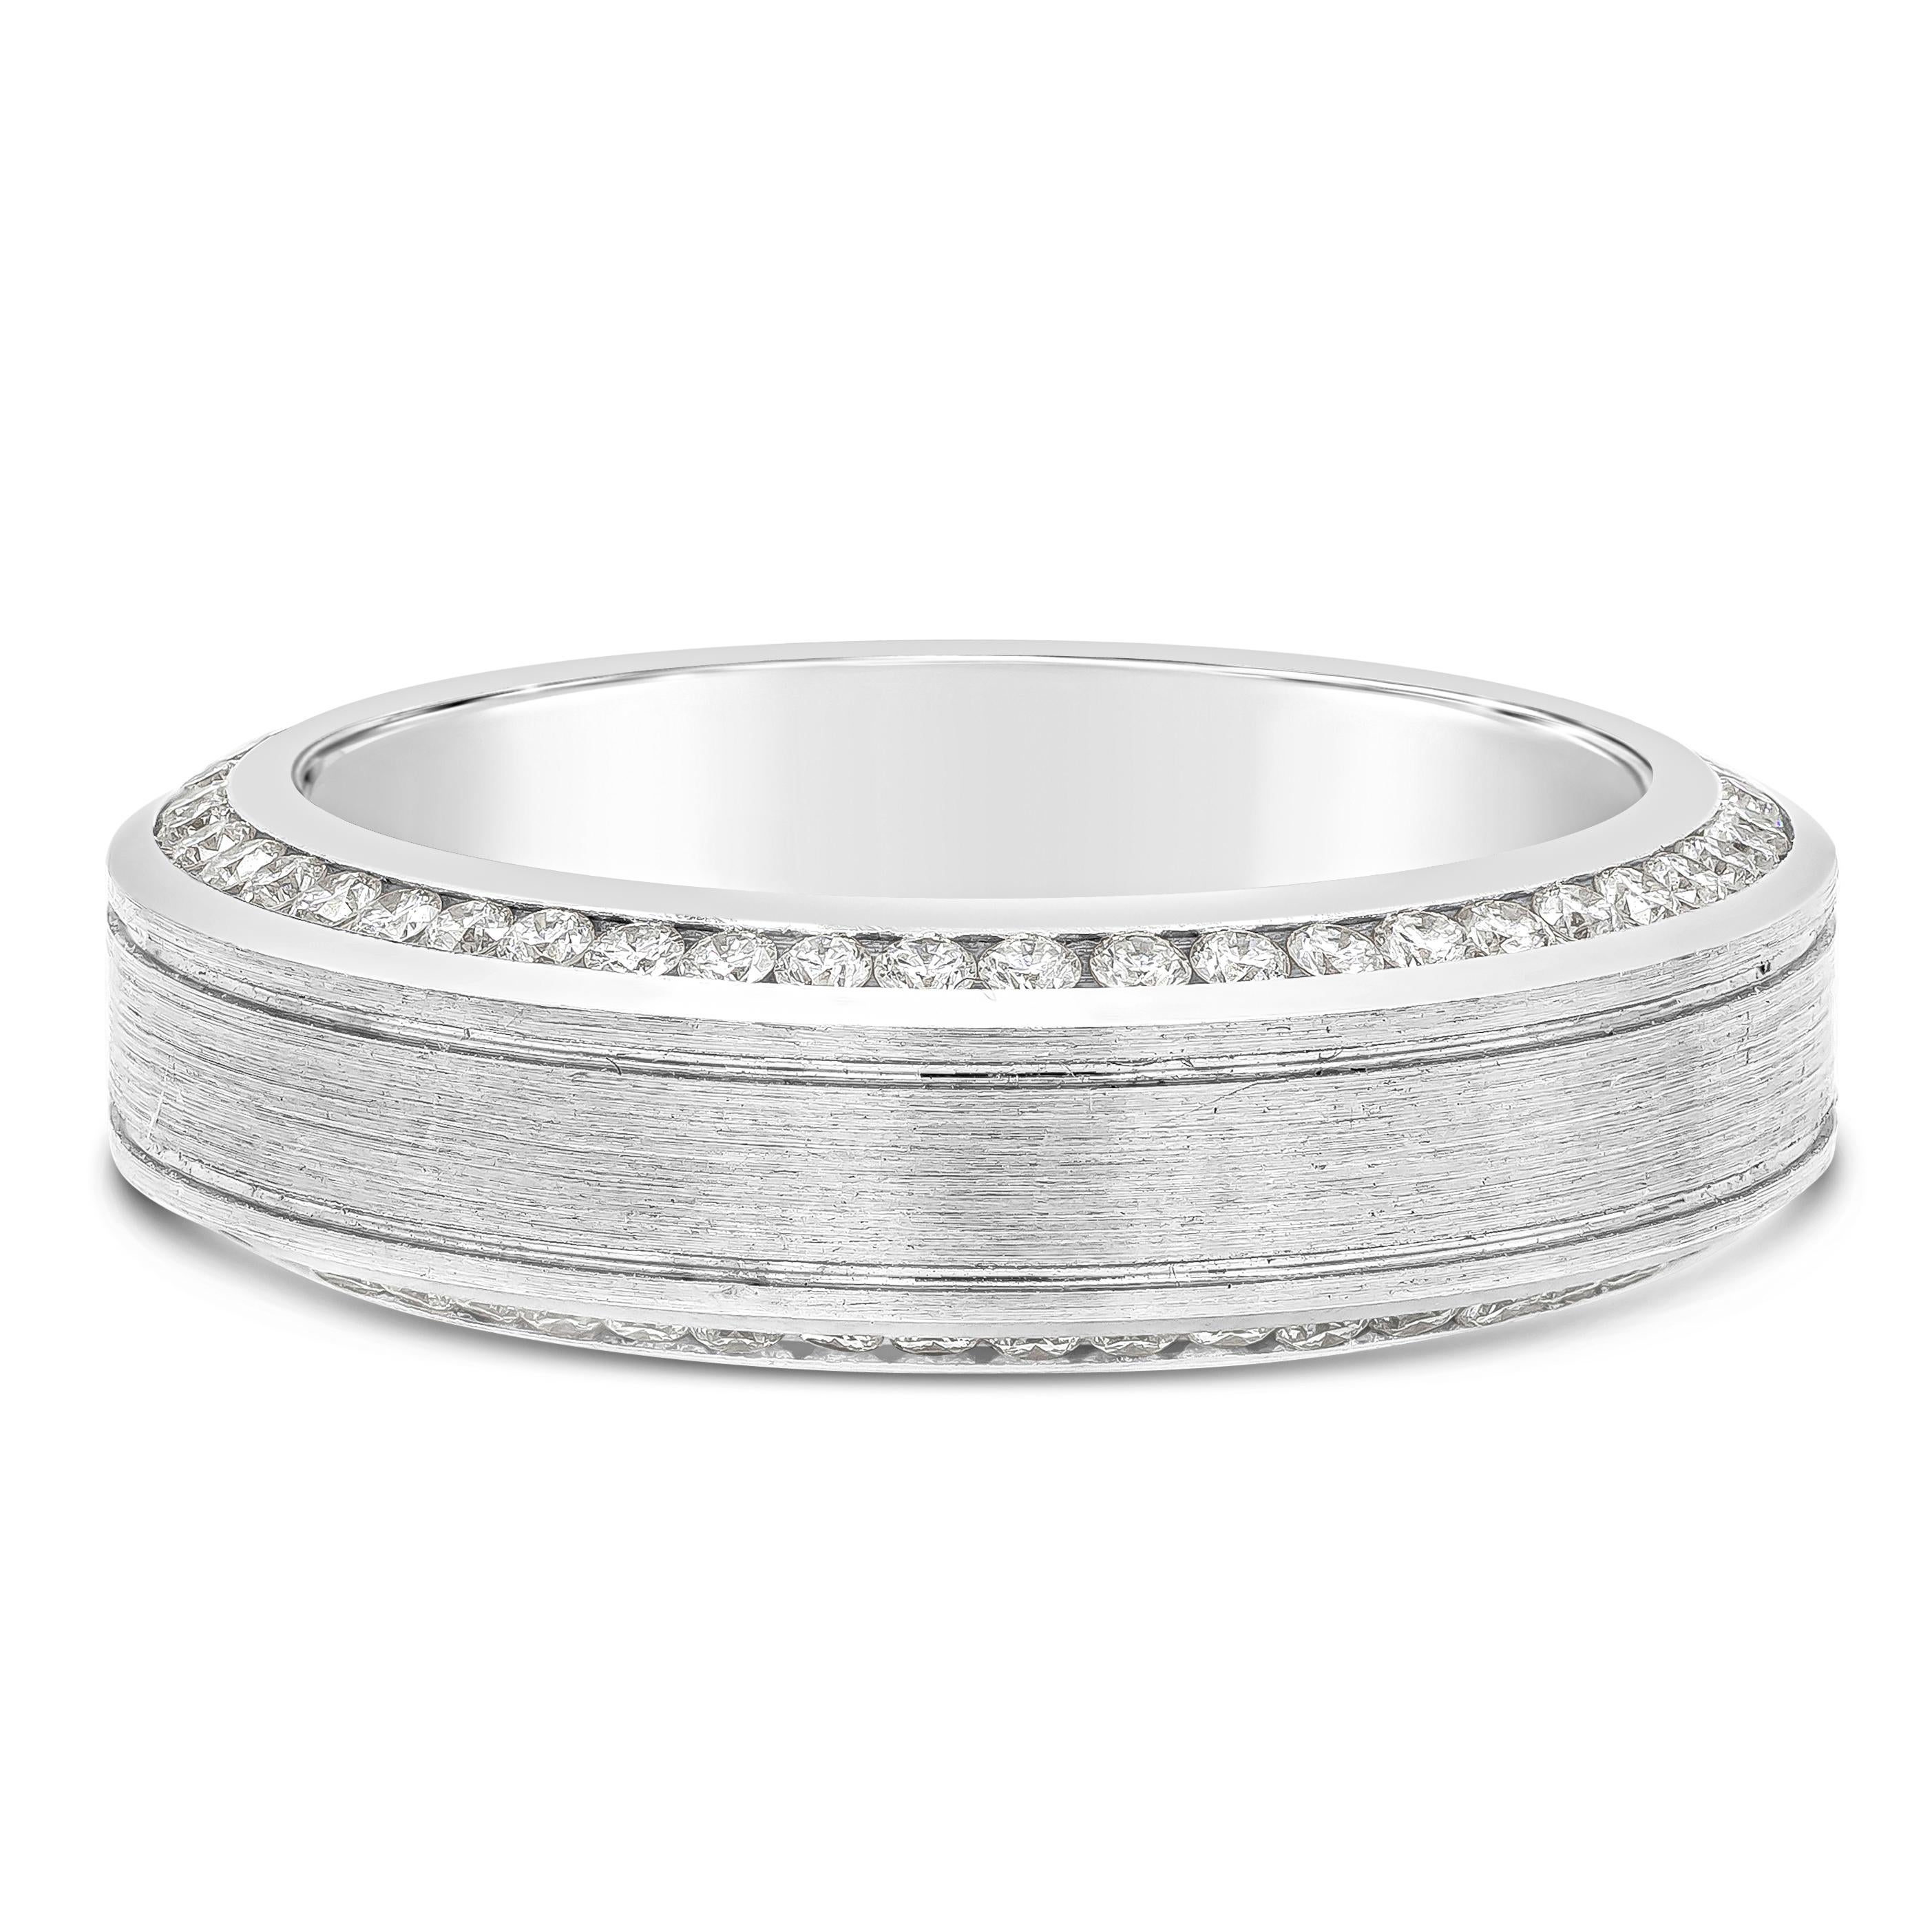 A comfort fit wedding band wrapped with brilliant round diamond channel set on each side of the ring. Two lines finely-engraved in the middle portion of the ring. 7mm wide, size 10 US.

Roman Malakov is a custom house, specializing in creating